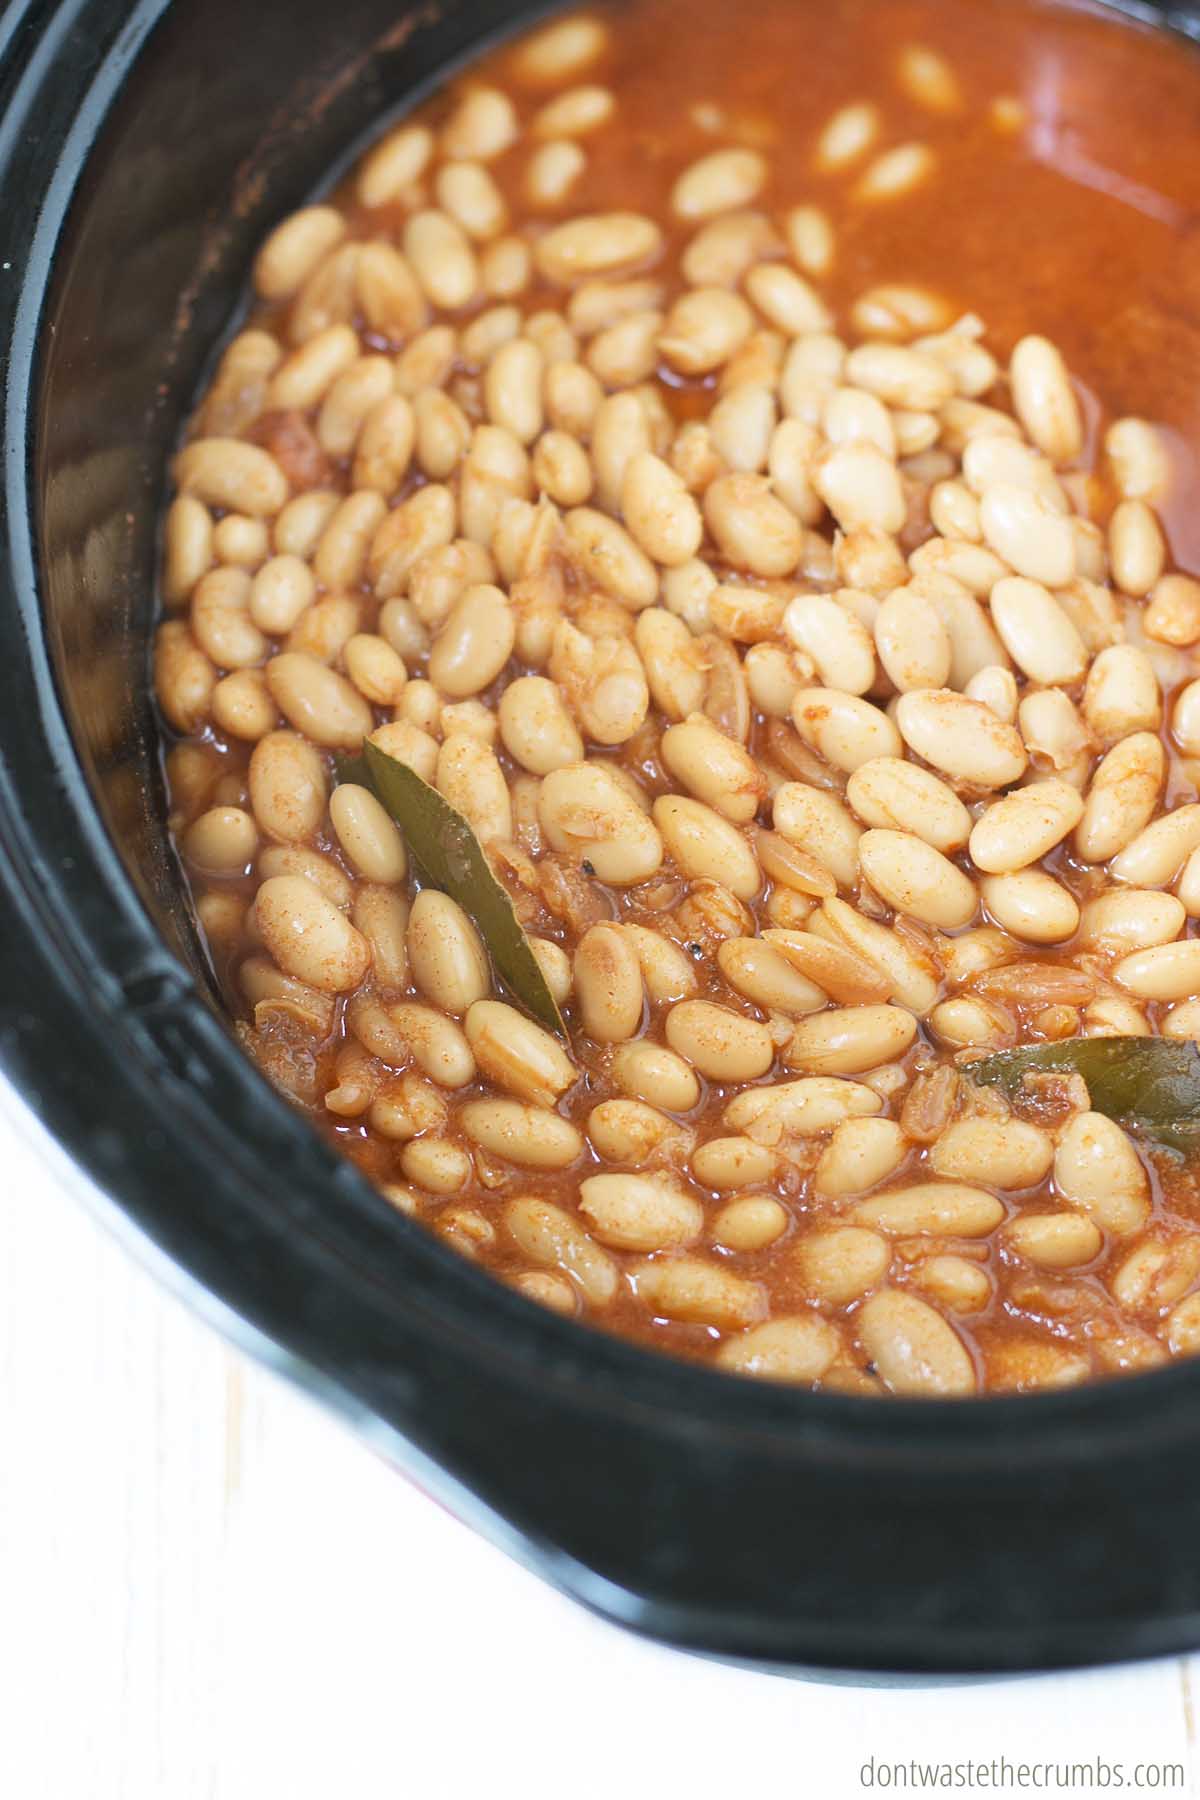 Baked beans in a slow cooker